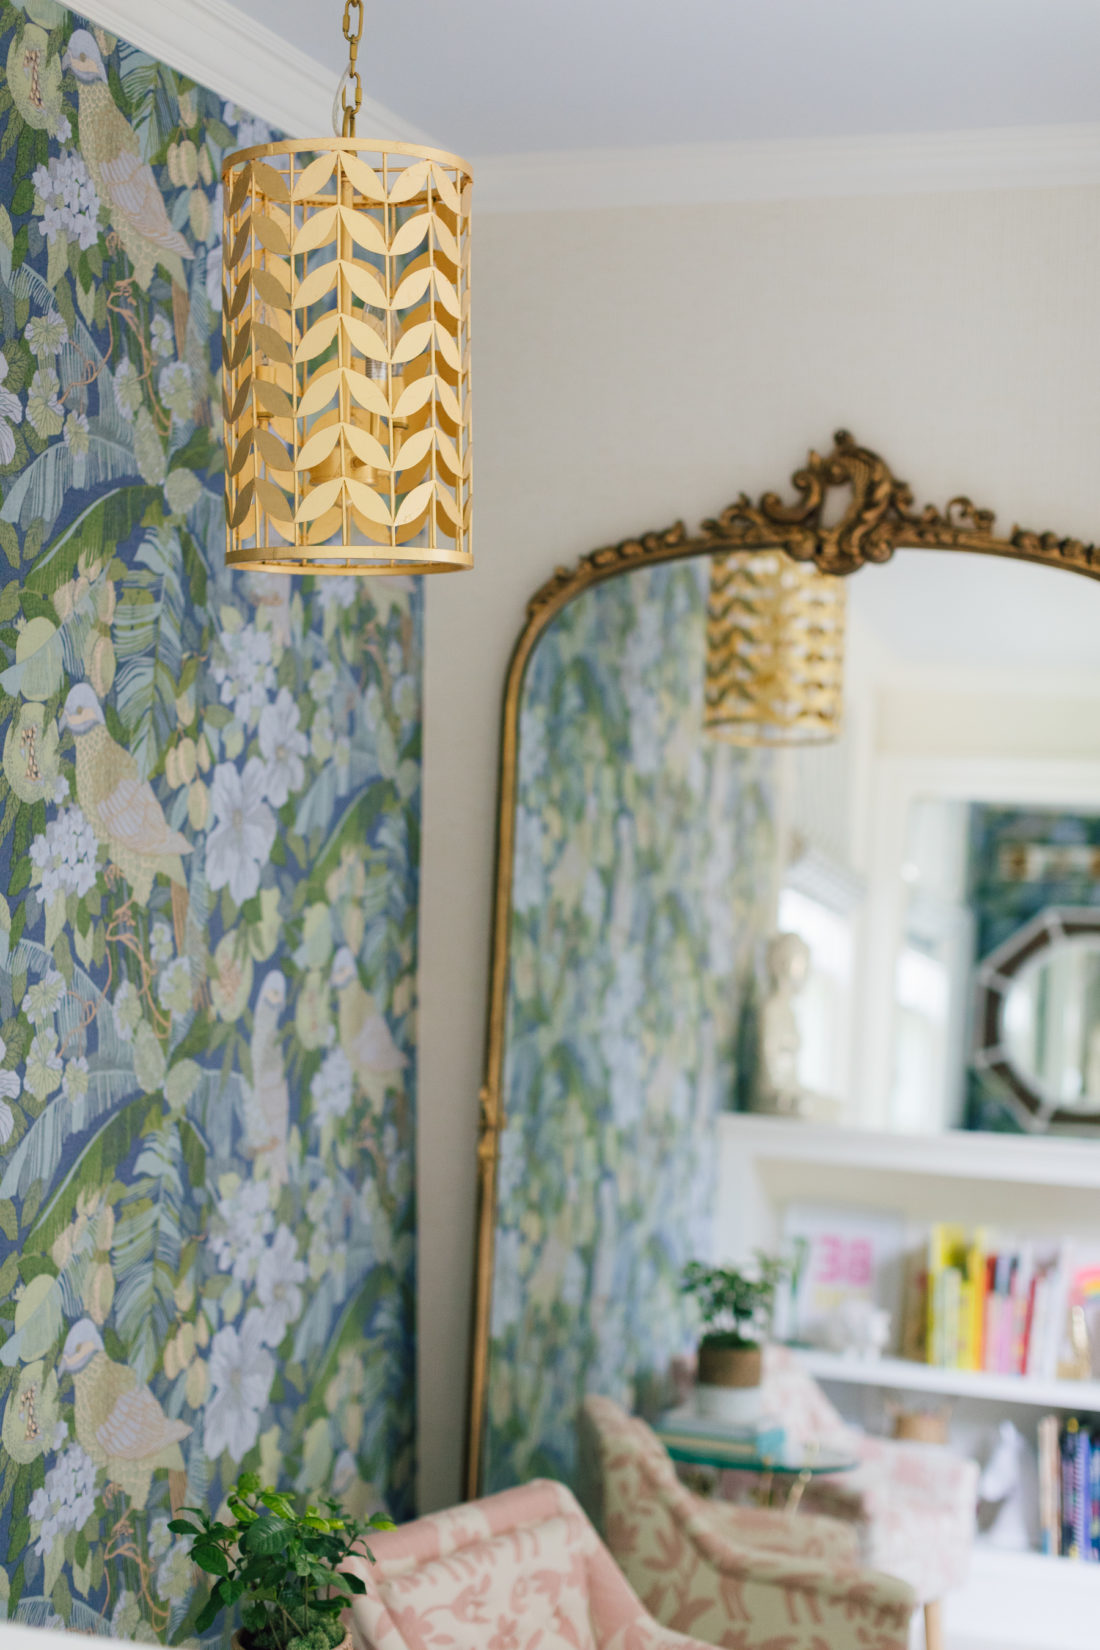 Marlowe Martino's colorful new bedroom reveal